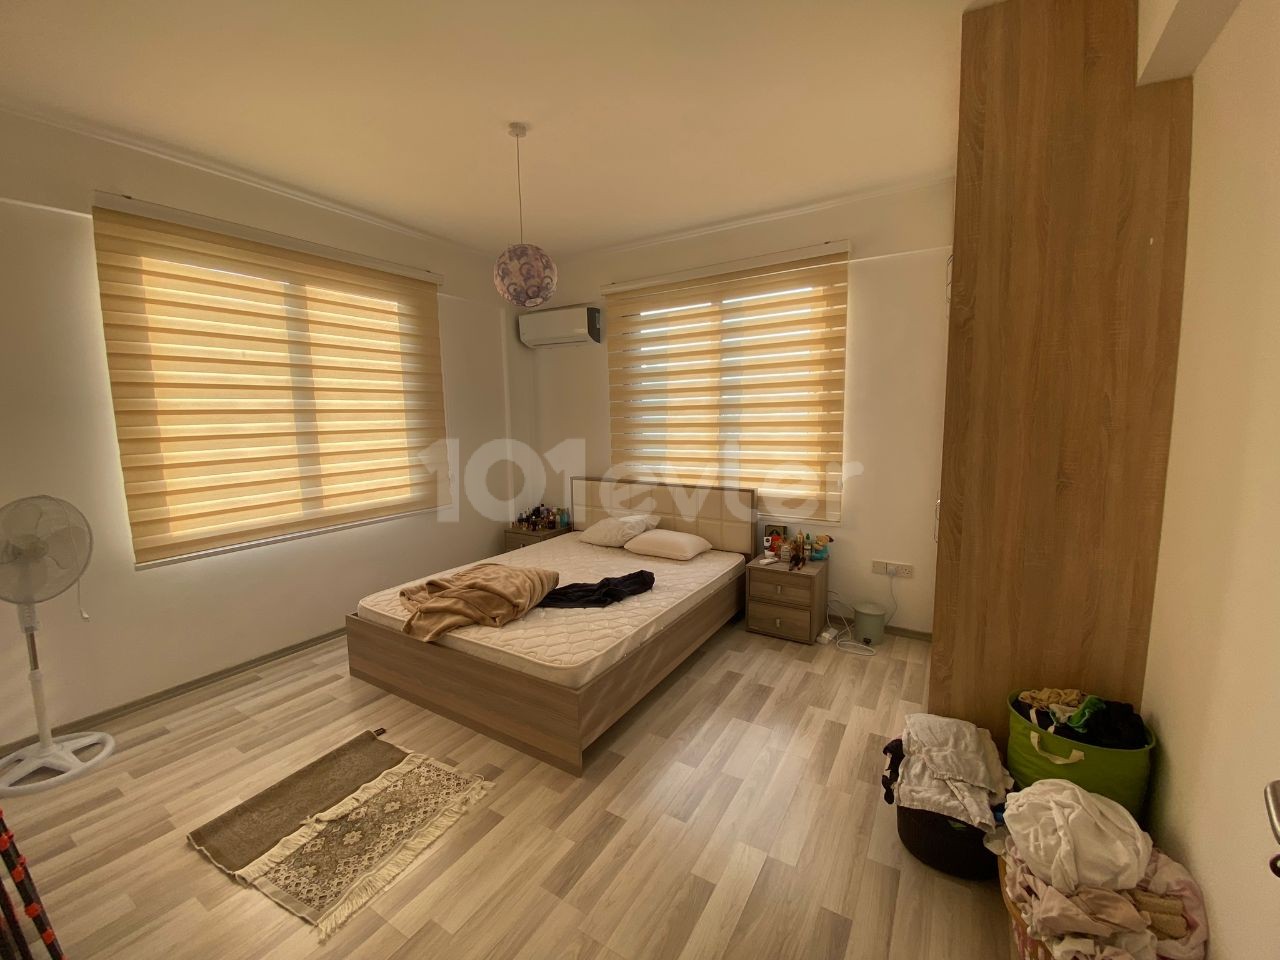 QUALITY FULLY Furnished, SPACIOUS, 2+1 APARTMENT FOR RENT in LEFKOŞA GÖNYELİ!